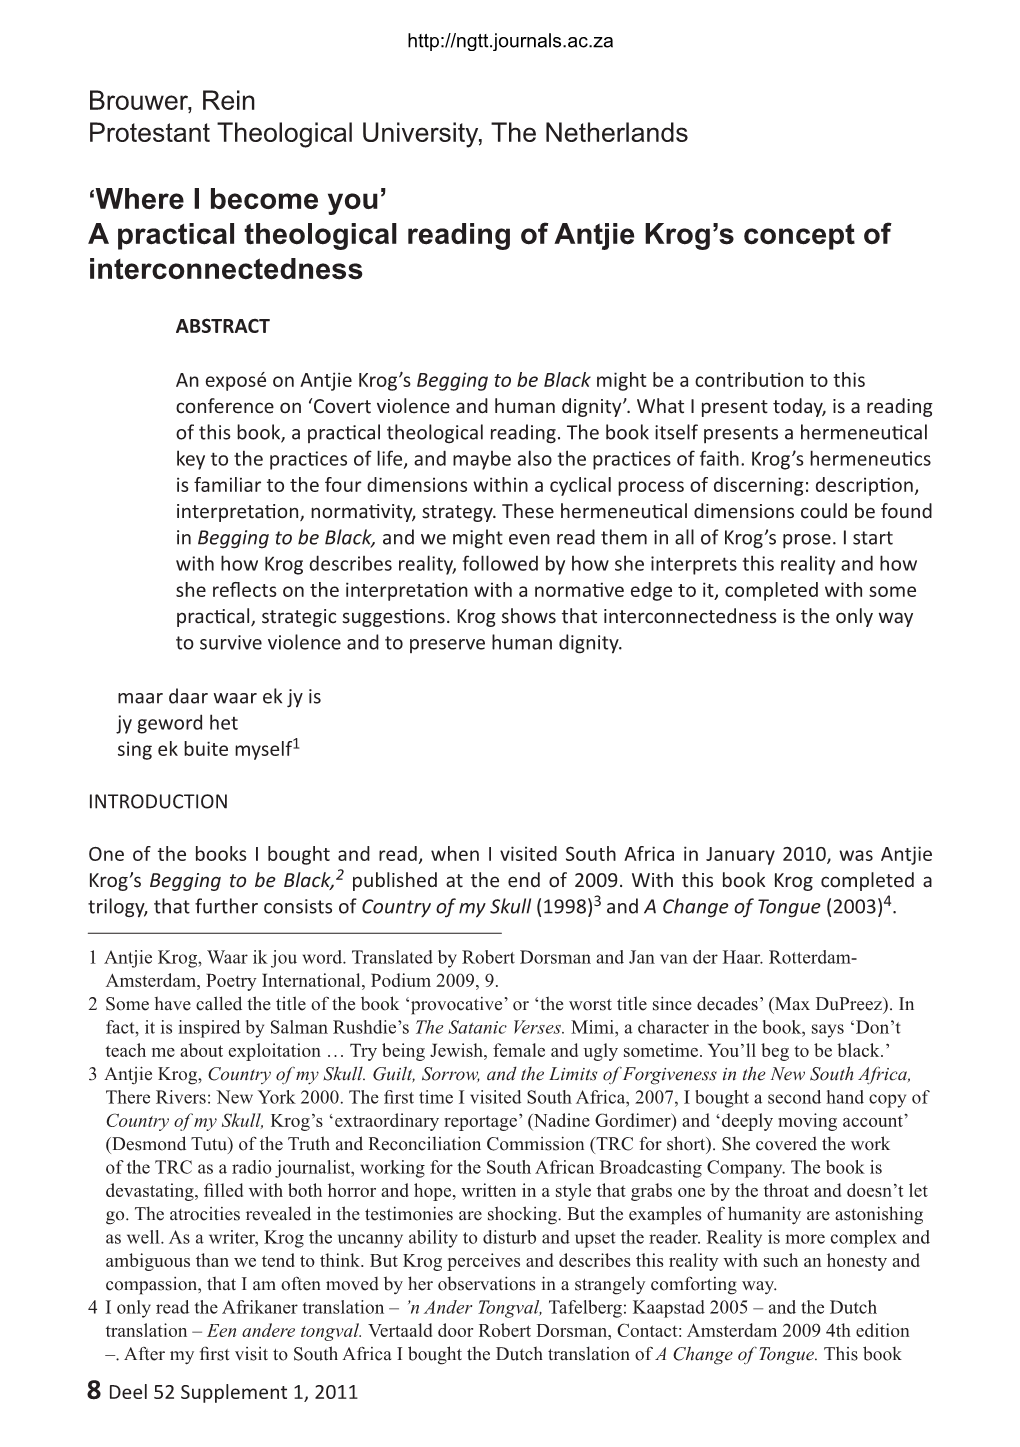 A Practical Theological Reading of Antjie Krog's Concept Of